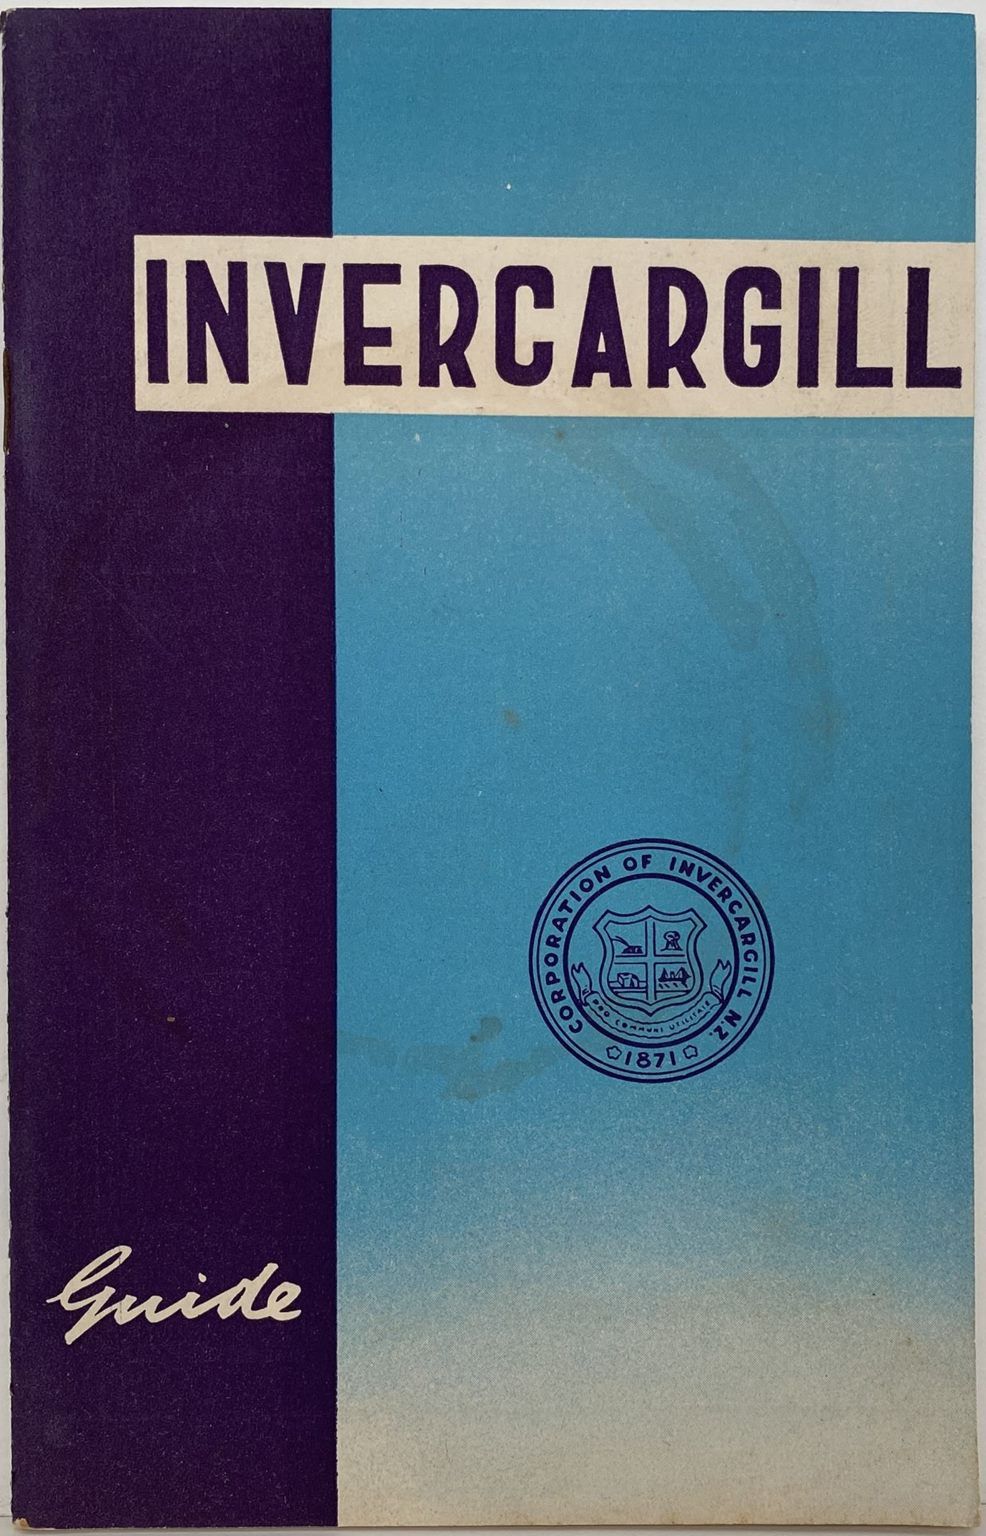 INVERCARGILL: The City of the South - Guide Book